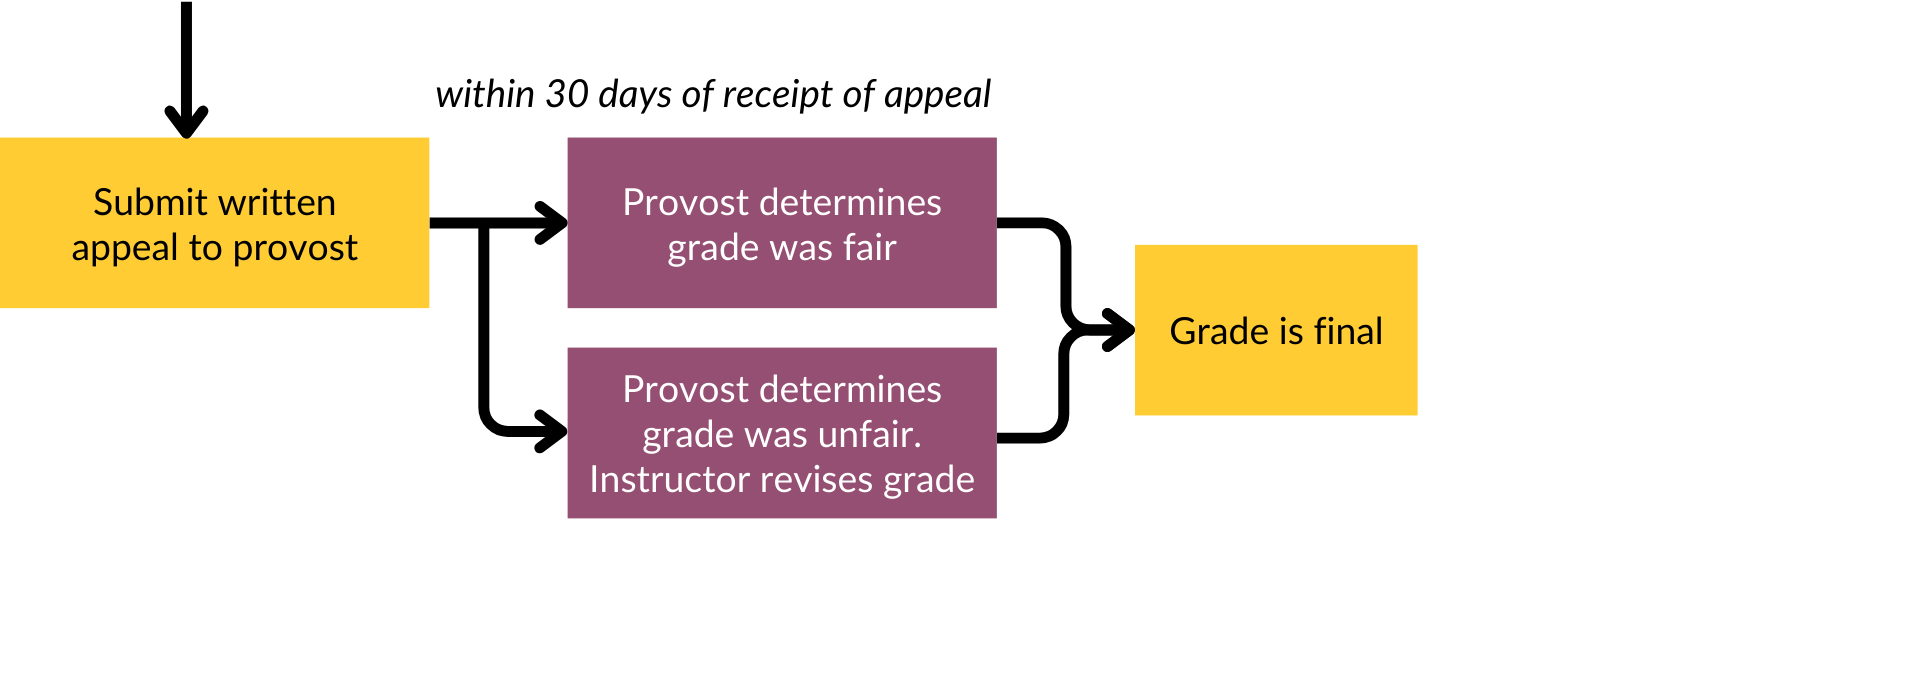 Grade appeal process for provost